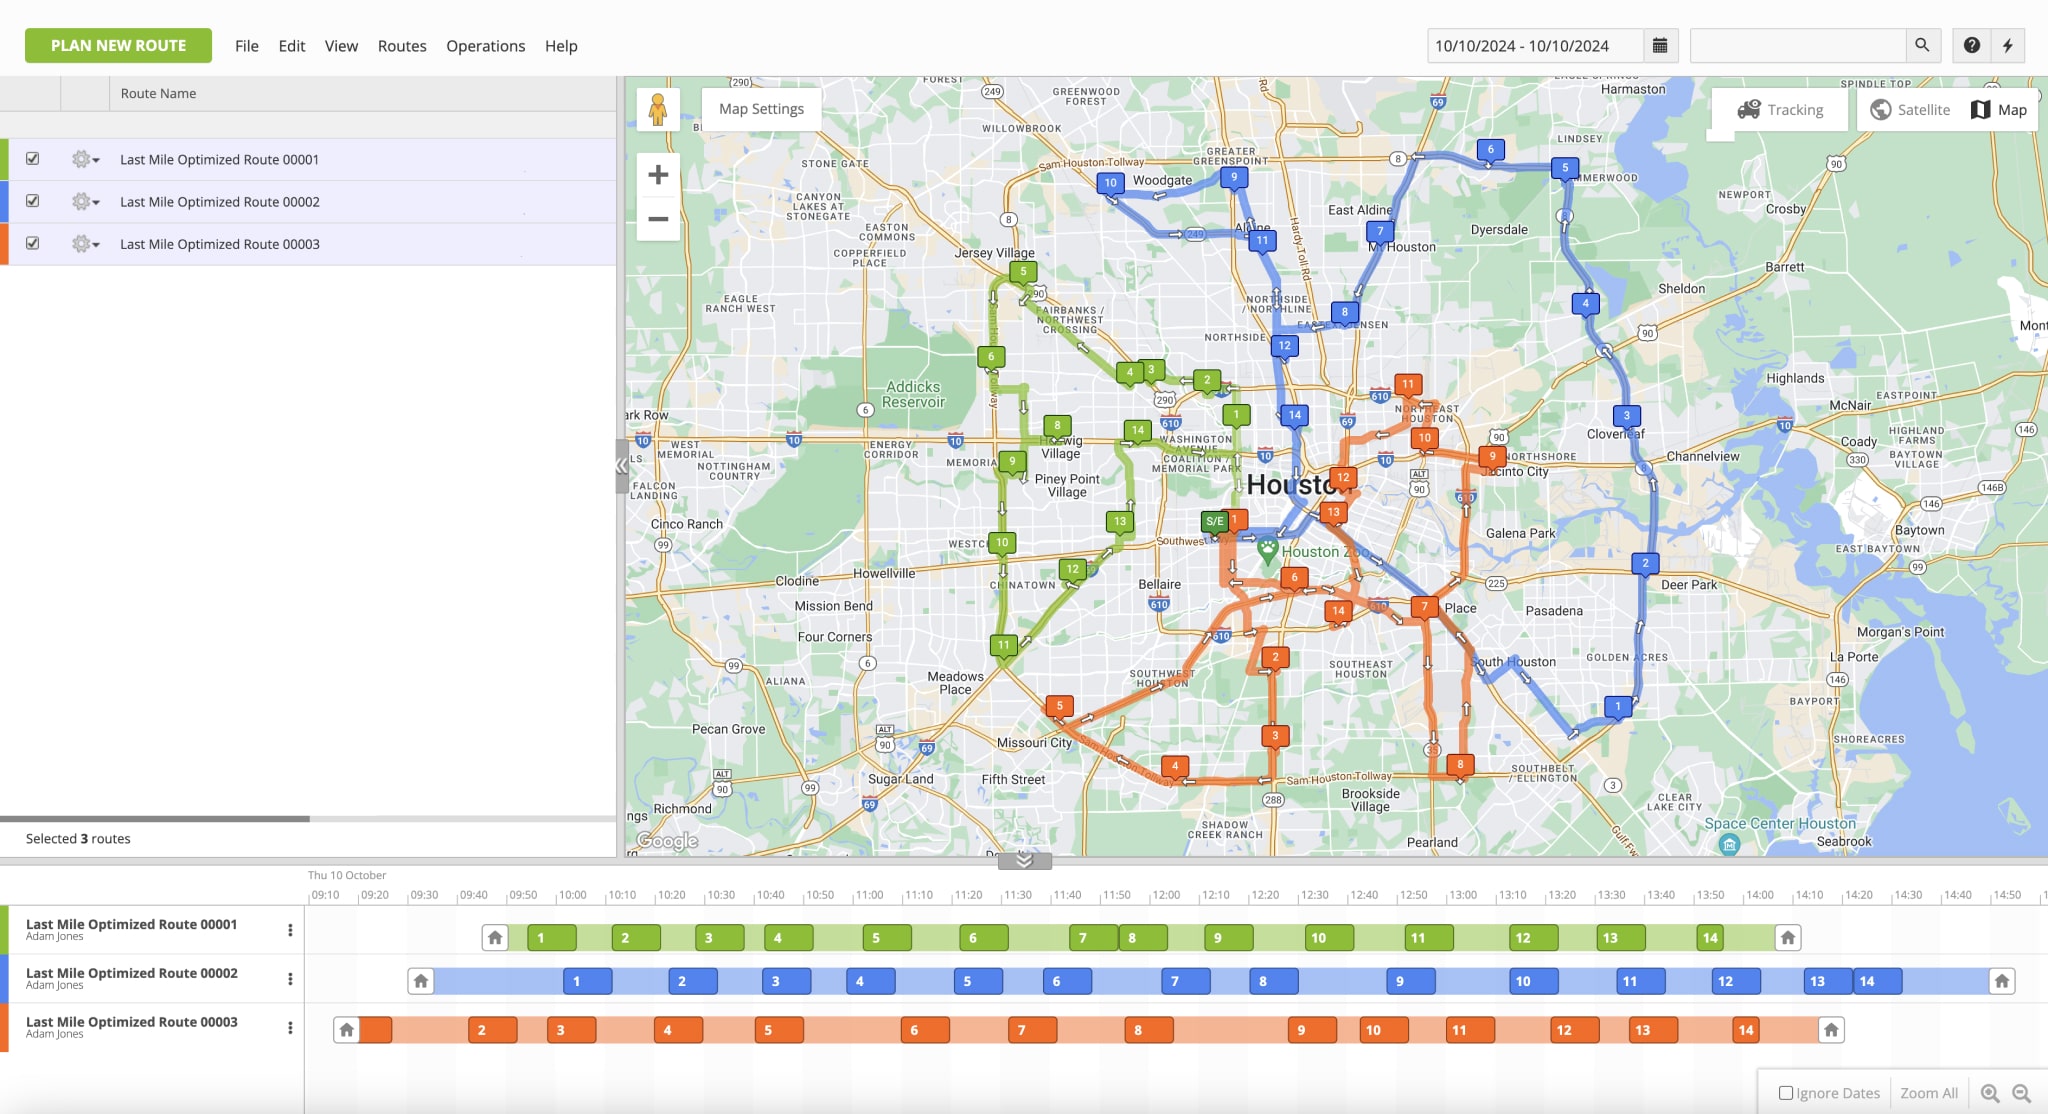 Open and manage multiple planned and optimized last mile routes on the same map with route timeline using Route4Me's Routes Map.